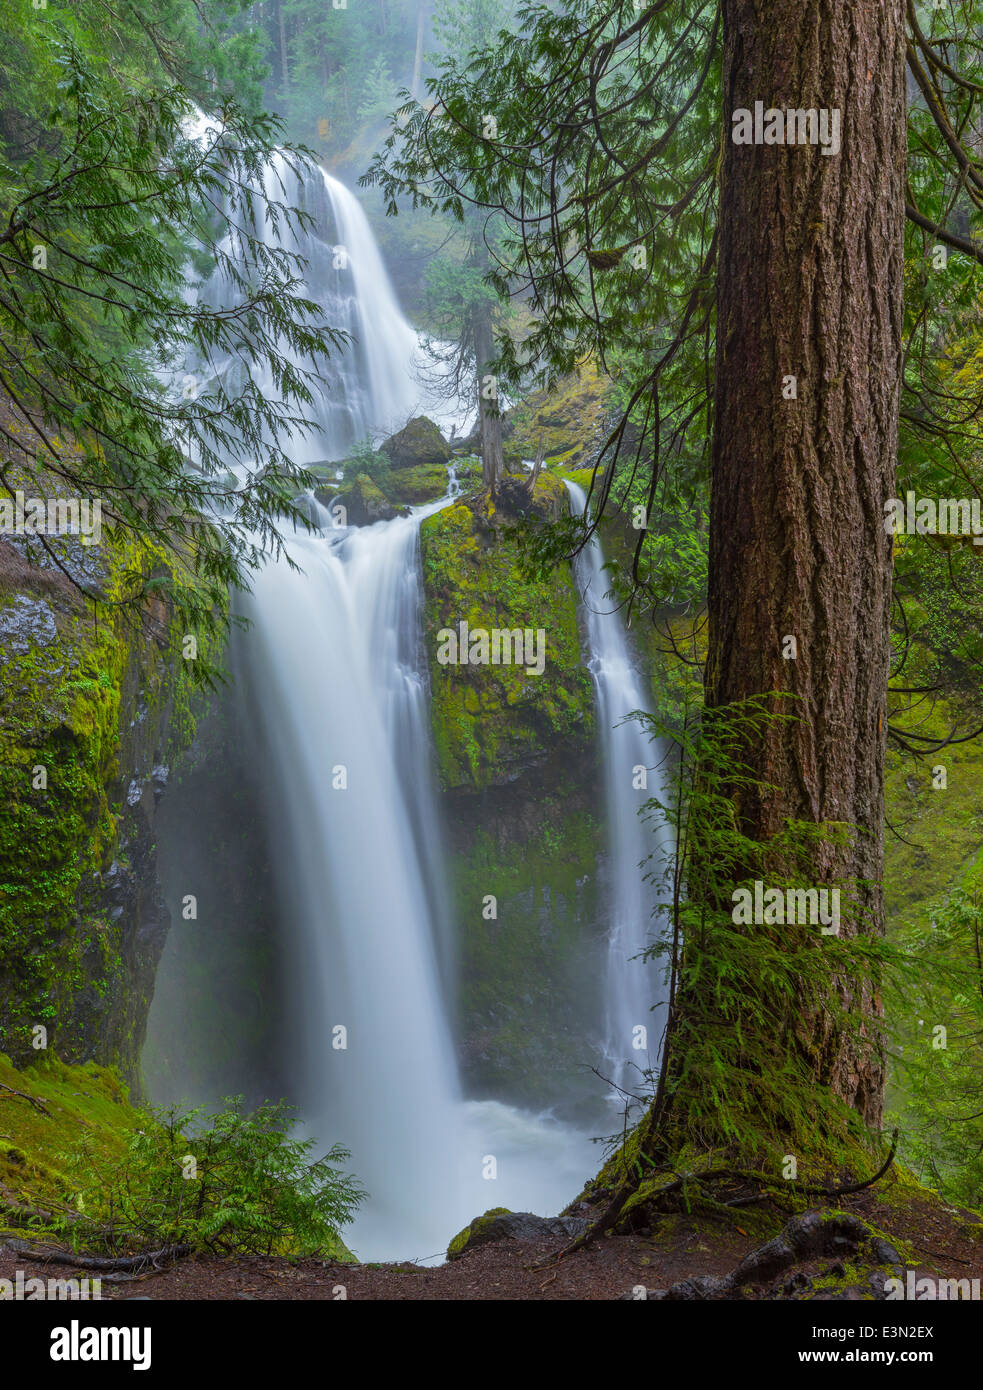 Gifford Pinchot National Forest, Washingon: Falls Creek Falls in the mist of spring flow Stock Photo